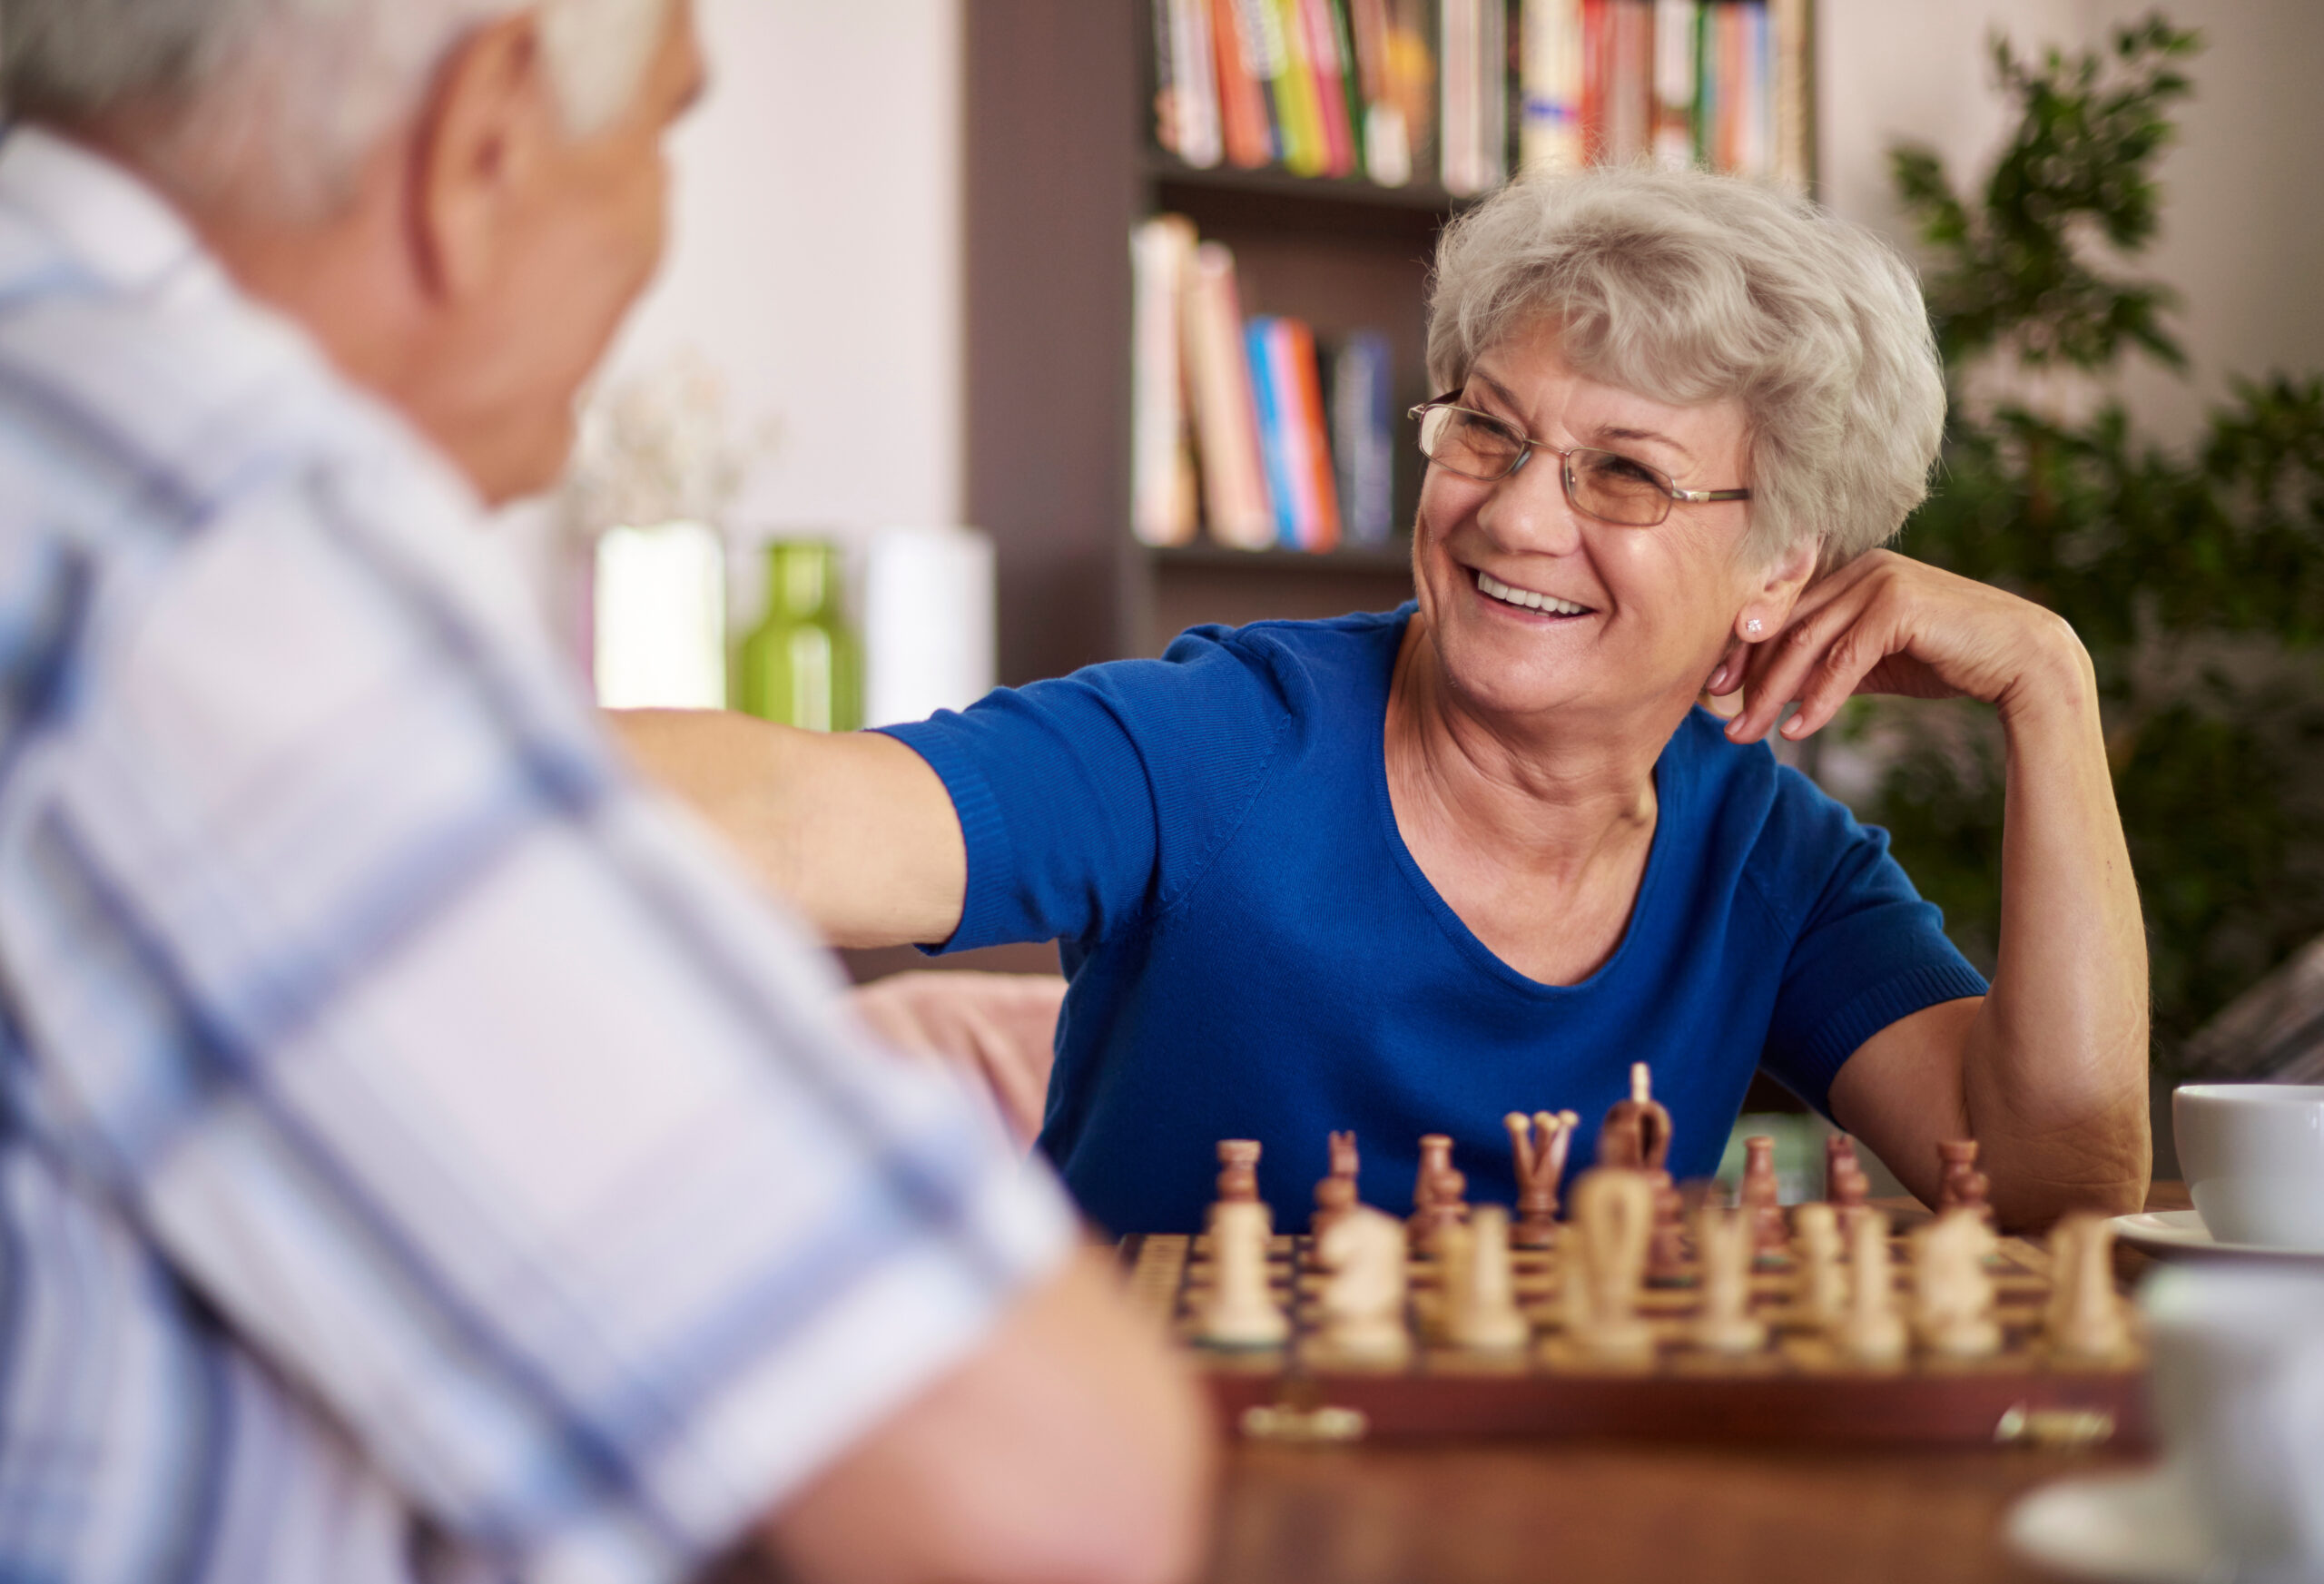 Activity Idea for Dementia: Learning and Playing Chess